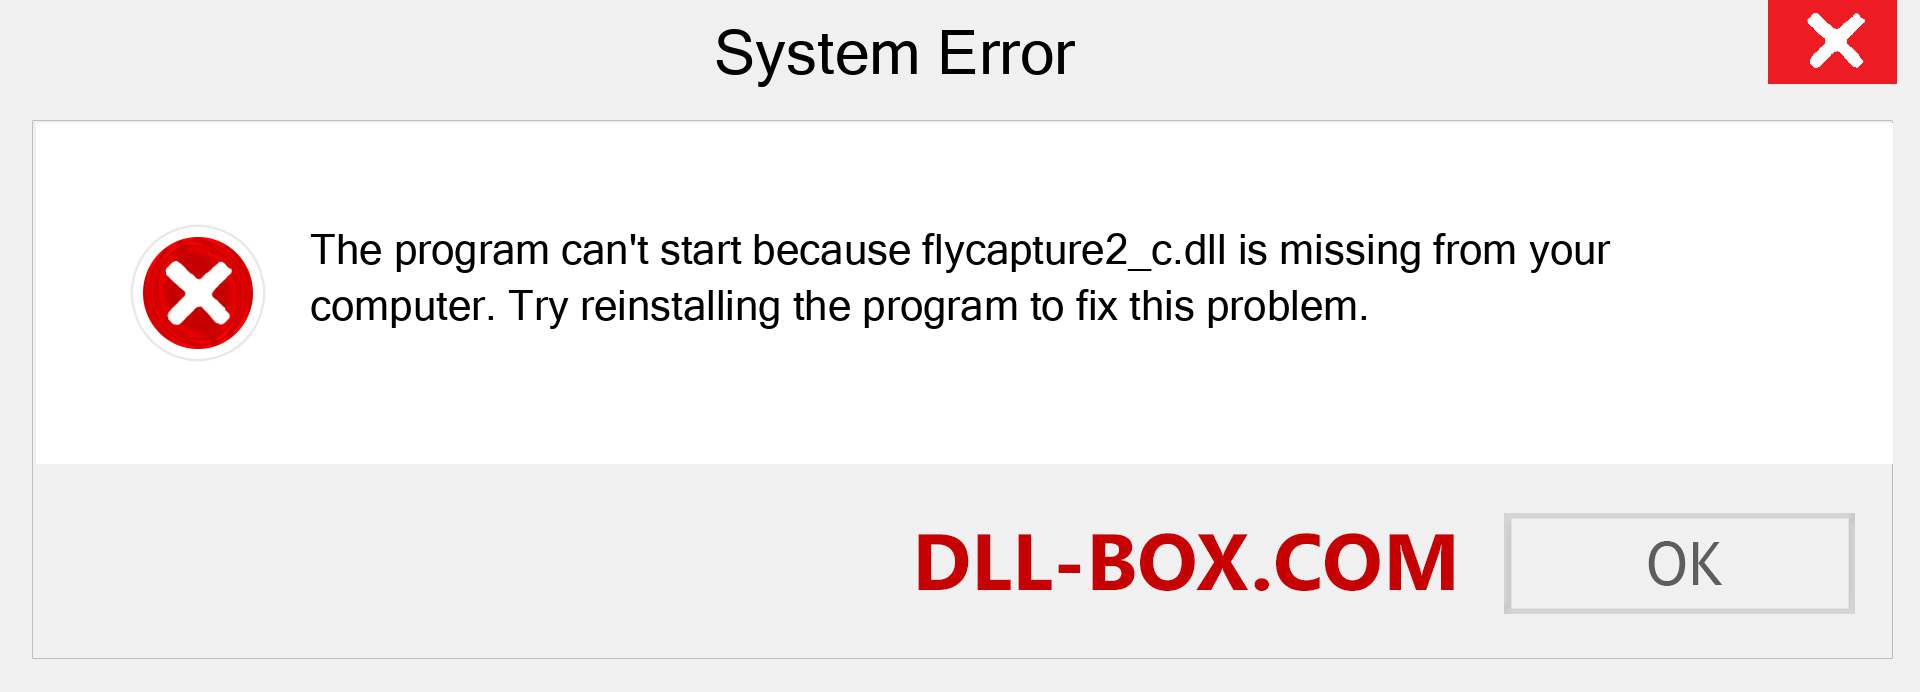  flycapture2_c.dll file is missing?. Download for Windows 7, 8, 10 - Fix  flycapture2_c dll Missing Error on Windows, photos, images